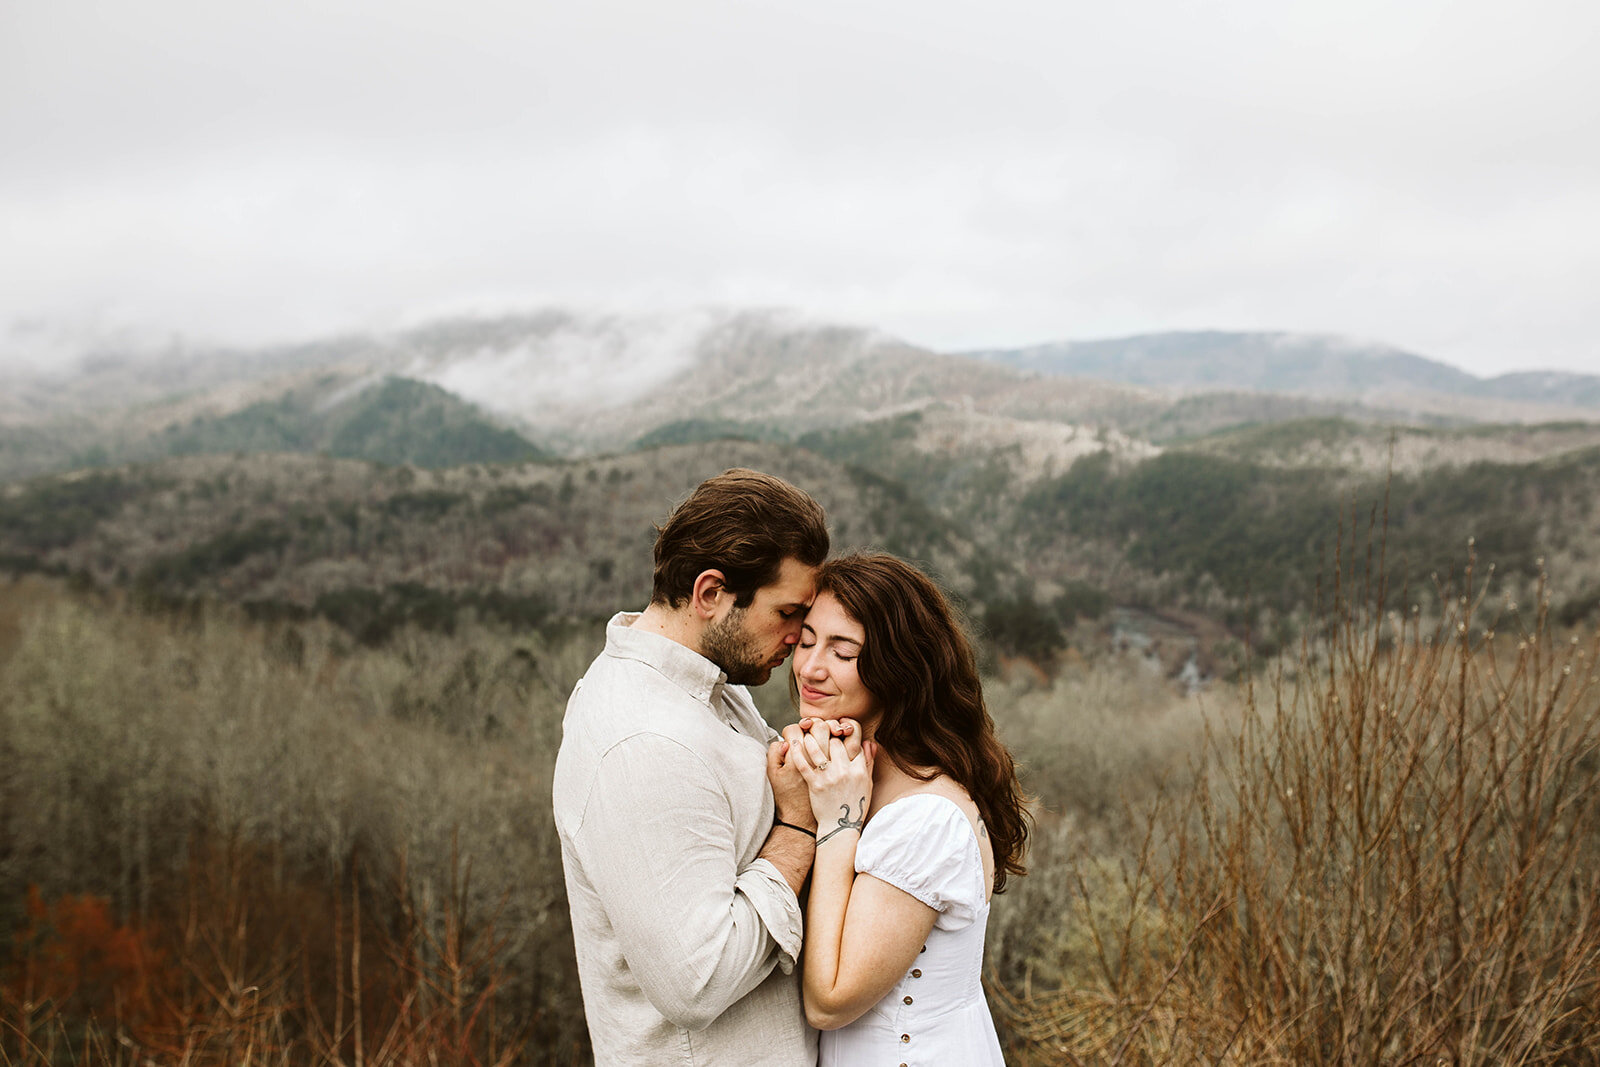 adventure-engagement-in-the-great-smoky-mountains-chattanooga-elopement-photographer5Y6A5352_websize.jpg